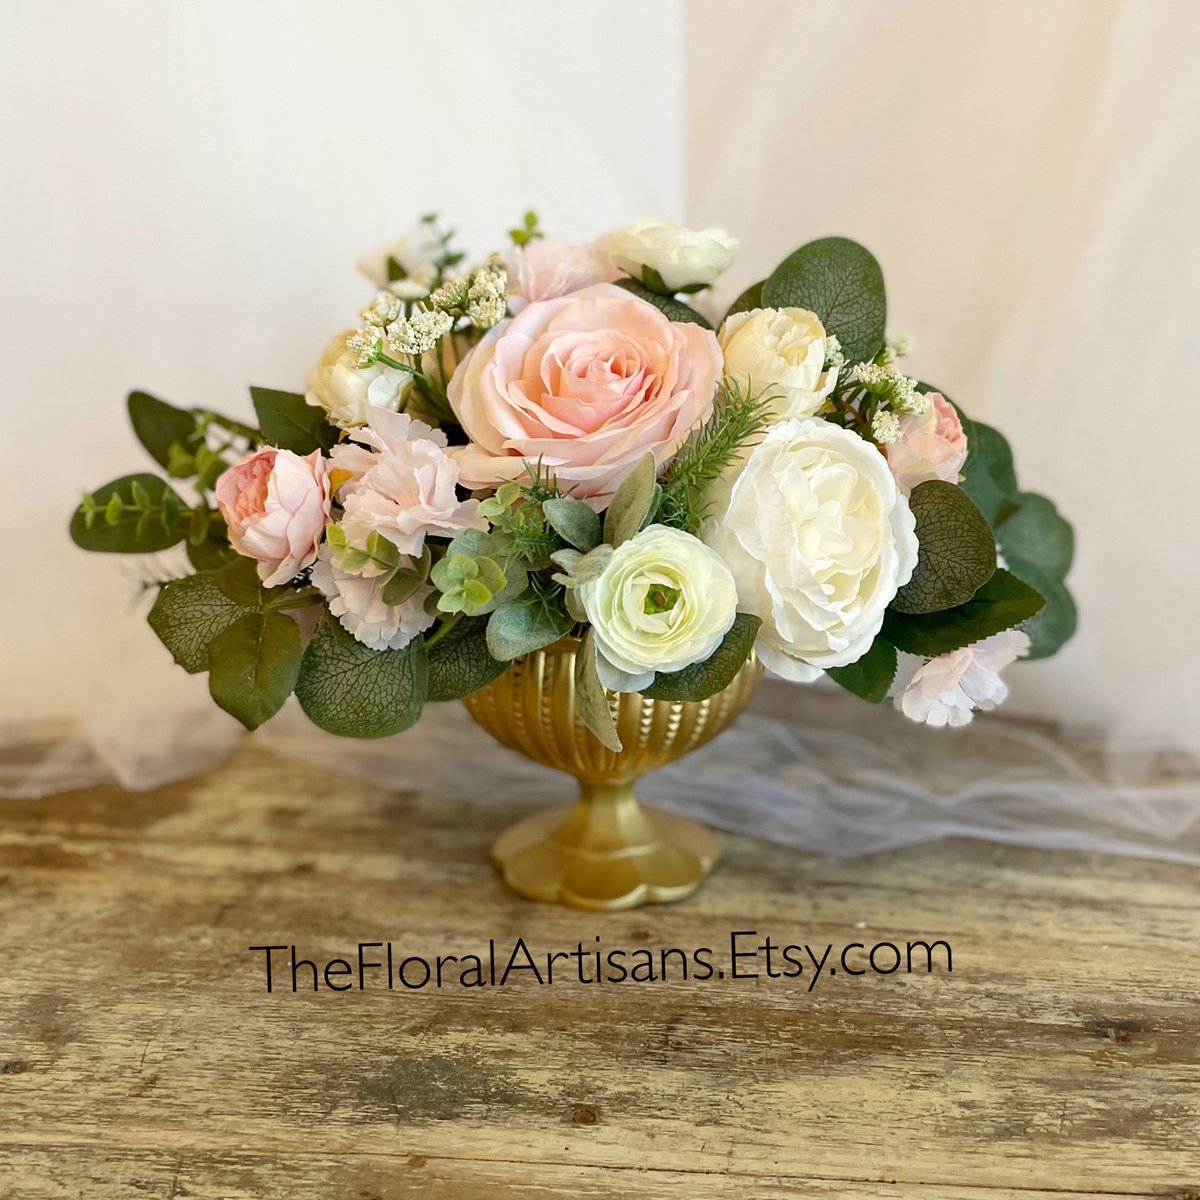 Excited to share this item from my #etsy shop: Silk Floral Wedding Centerpiece | Soft Pink Floral Arrangement | Wedding Floral Centerpiece | Blush French Country Floral Centerpiece #birthday #rose #weddingflowers #fauxflowers #virginia  etsy.me/3TQPNoI